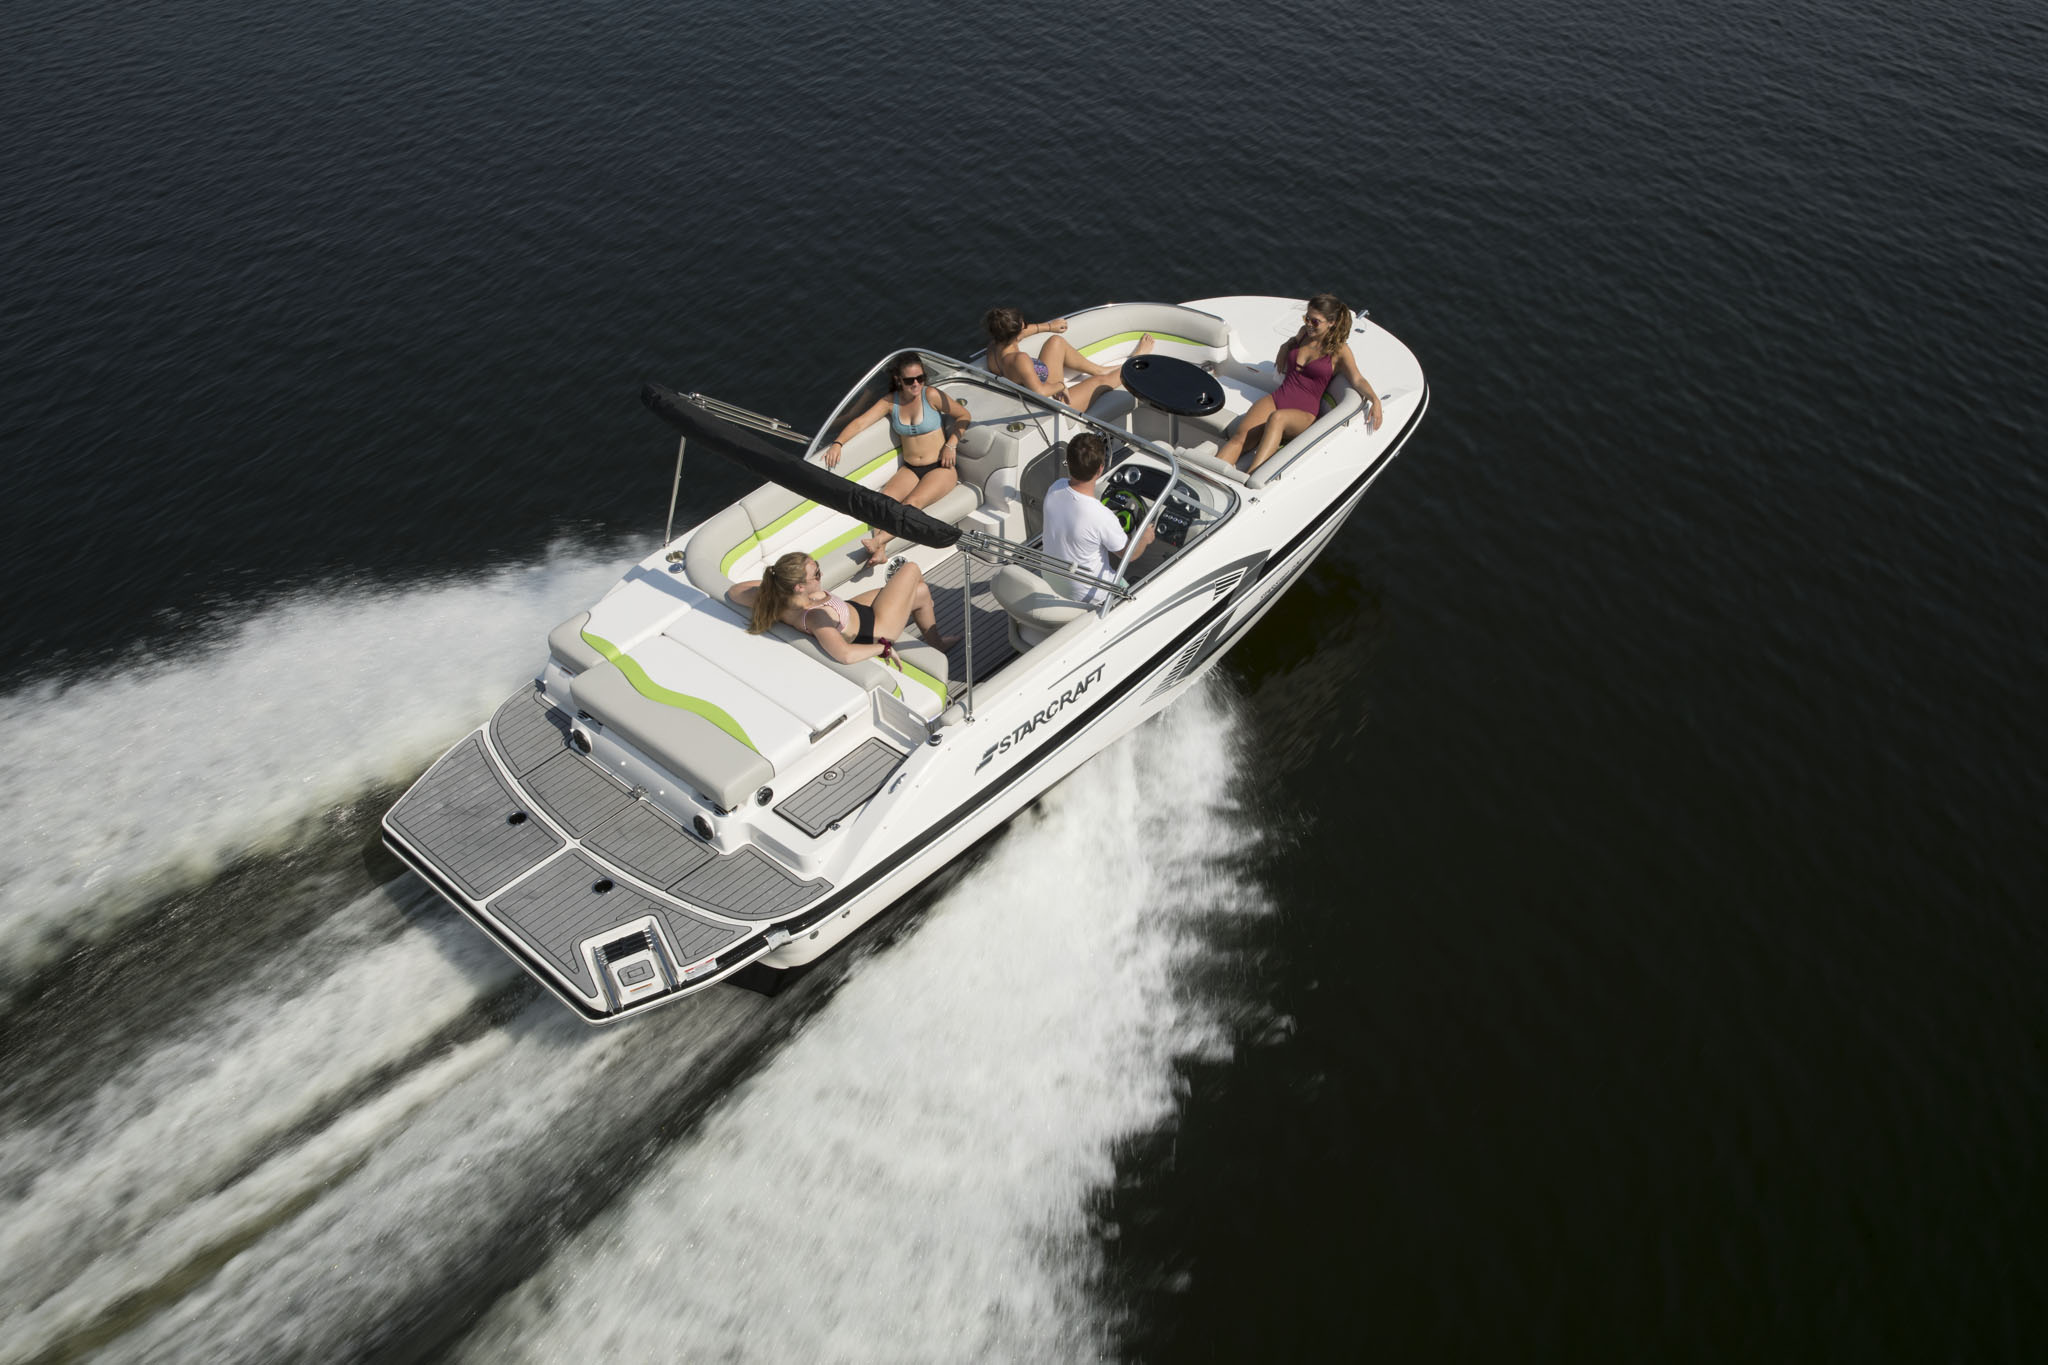 Group of people enjoying a sunny day on the lake with a Starcraft® boat